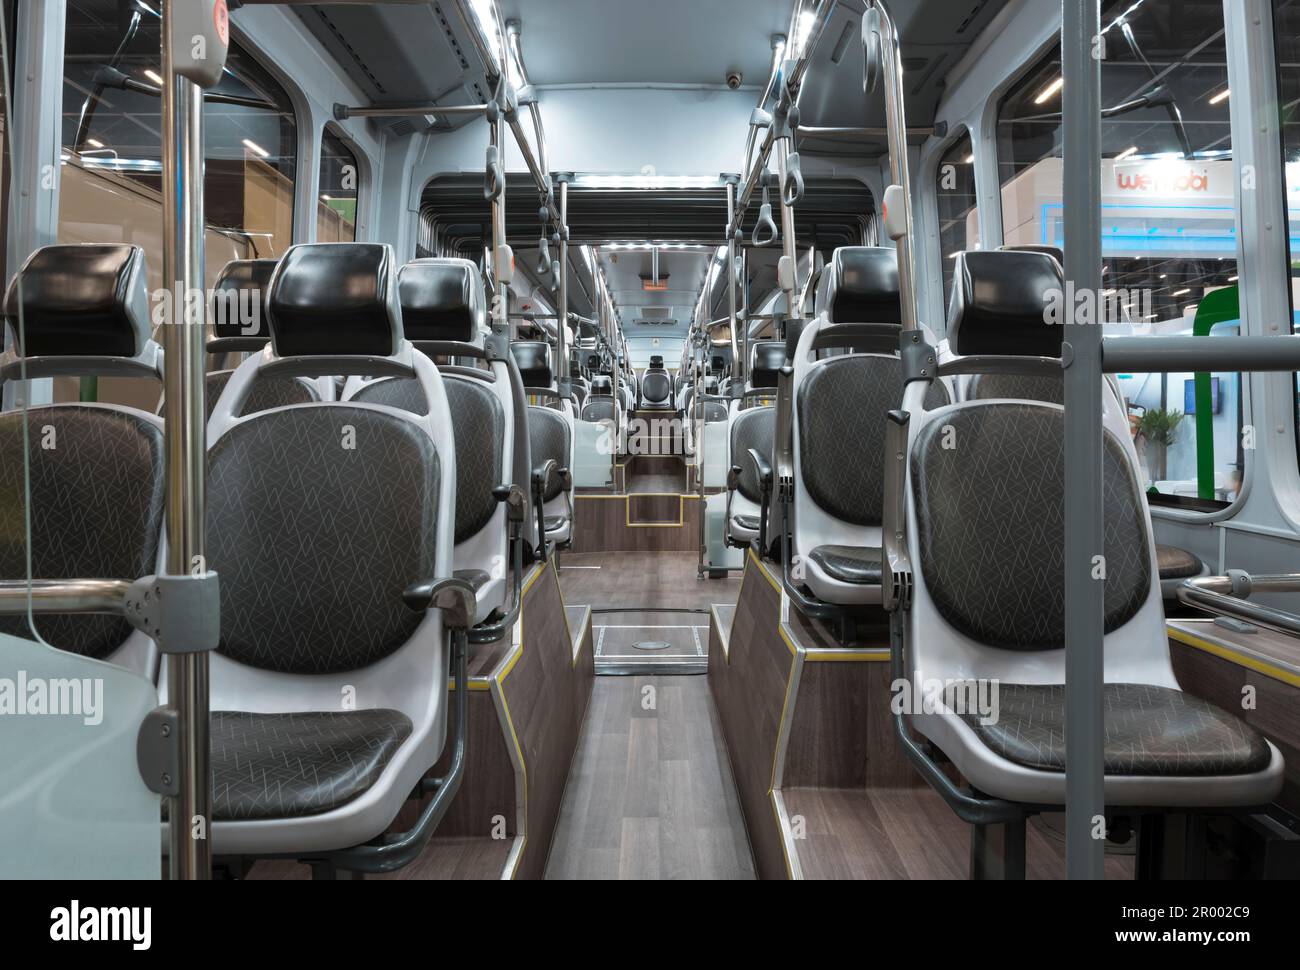 Interior of an articulated bus. Low floor vehicle. On display at the public transport show LAT.BUS 2022, held in the city of São Paulo. Stock Photo